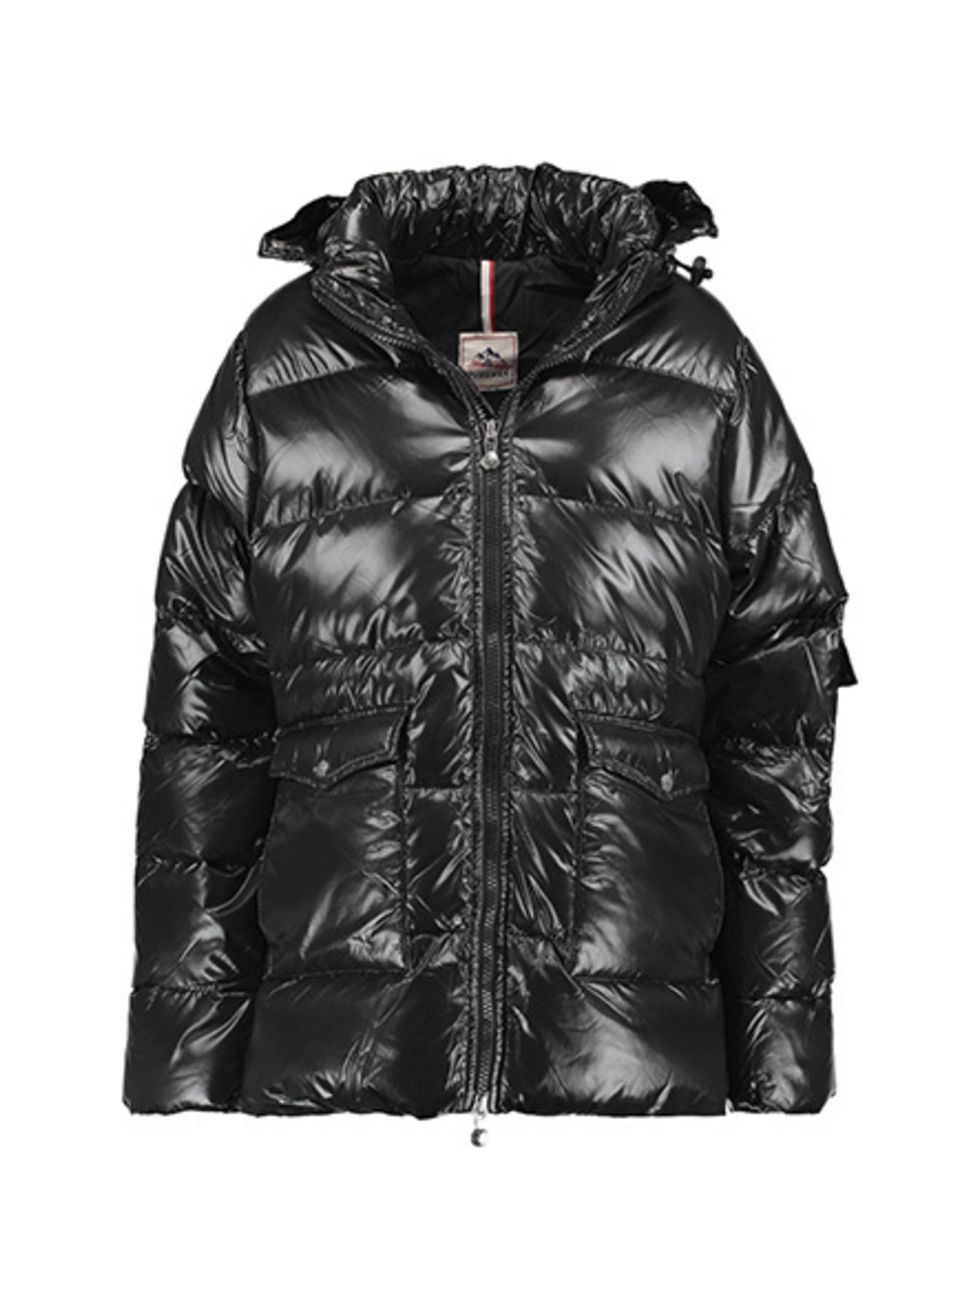 <p>Padded jacket, £220, <a href="https://www.theoutnet.com/en-GB/product/Pyrenex/Authentic-quilted-shell-down-jacket/719112">Pyrenex at The Outnet</a></p>